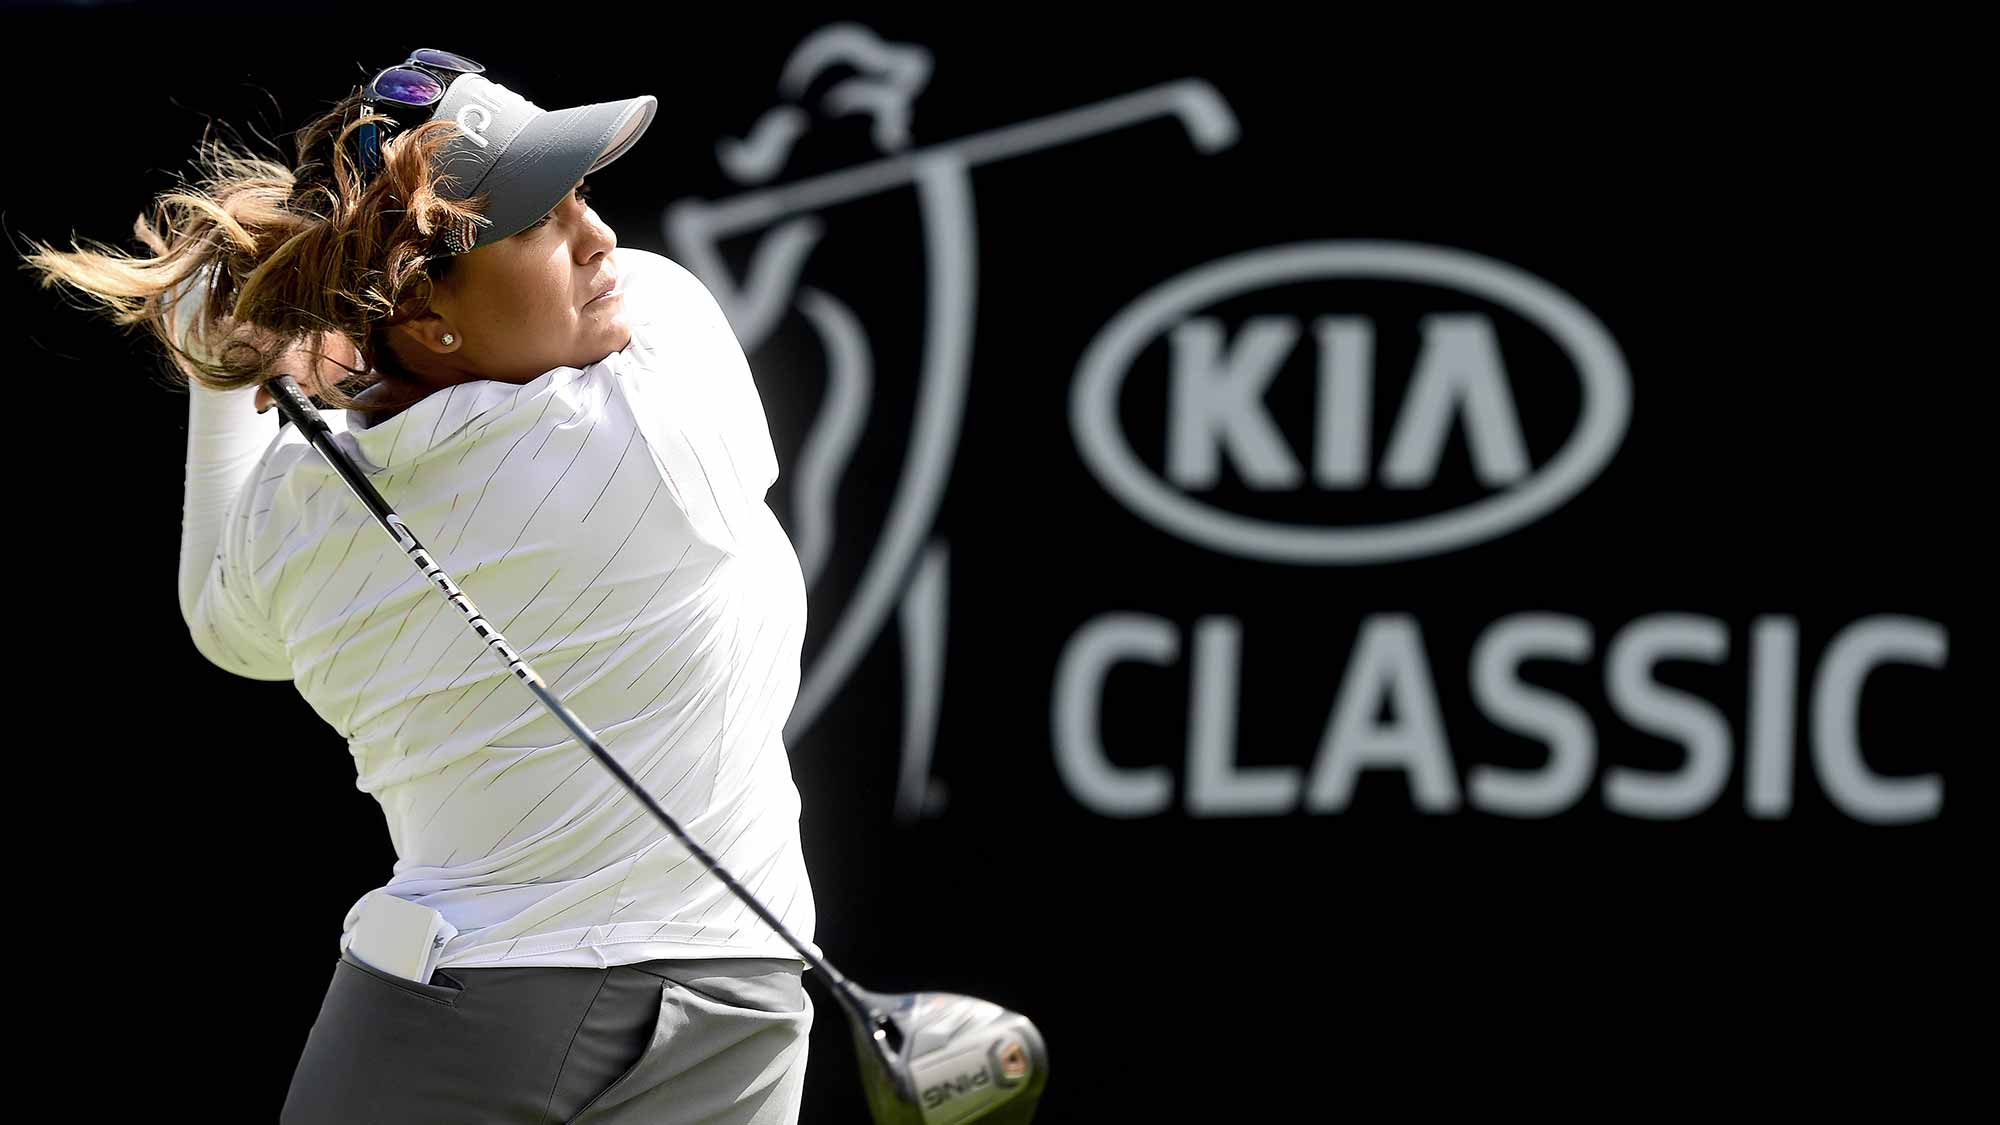 Lizette Salas tees off the 1st hole during Round Three of the LPGA KIA CLASSIC at the Park Hyatt Aviara golf course on March 24, 2018 in Carlsbad, California